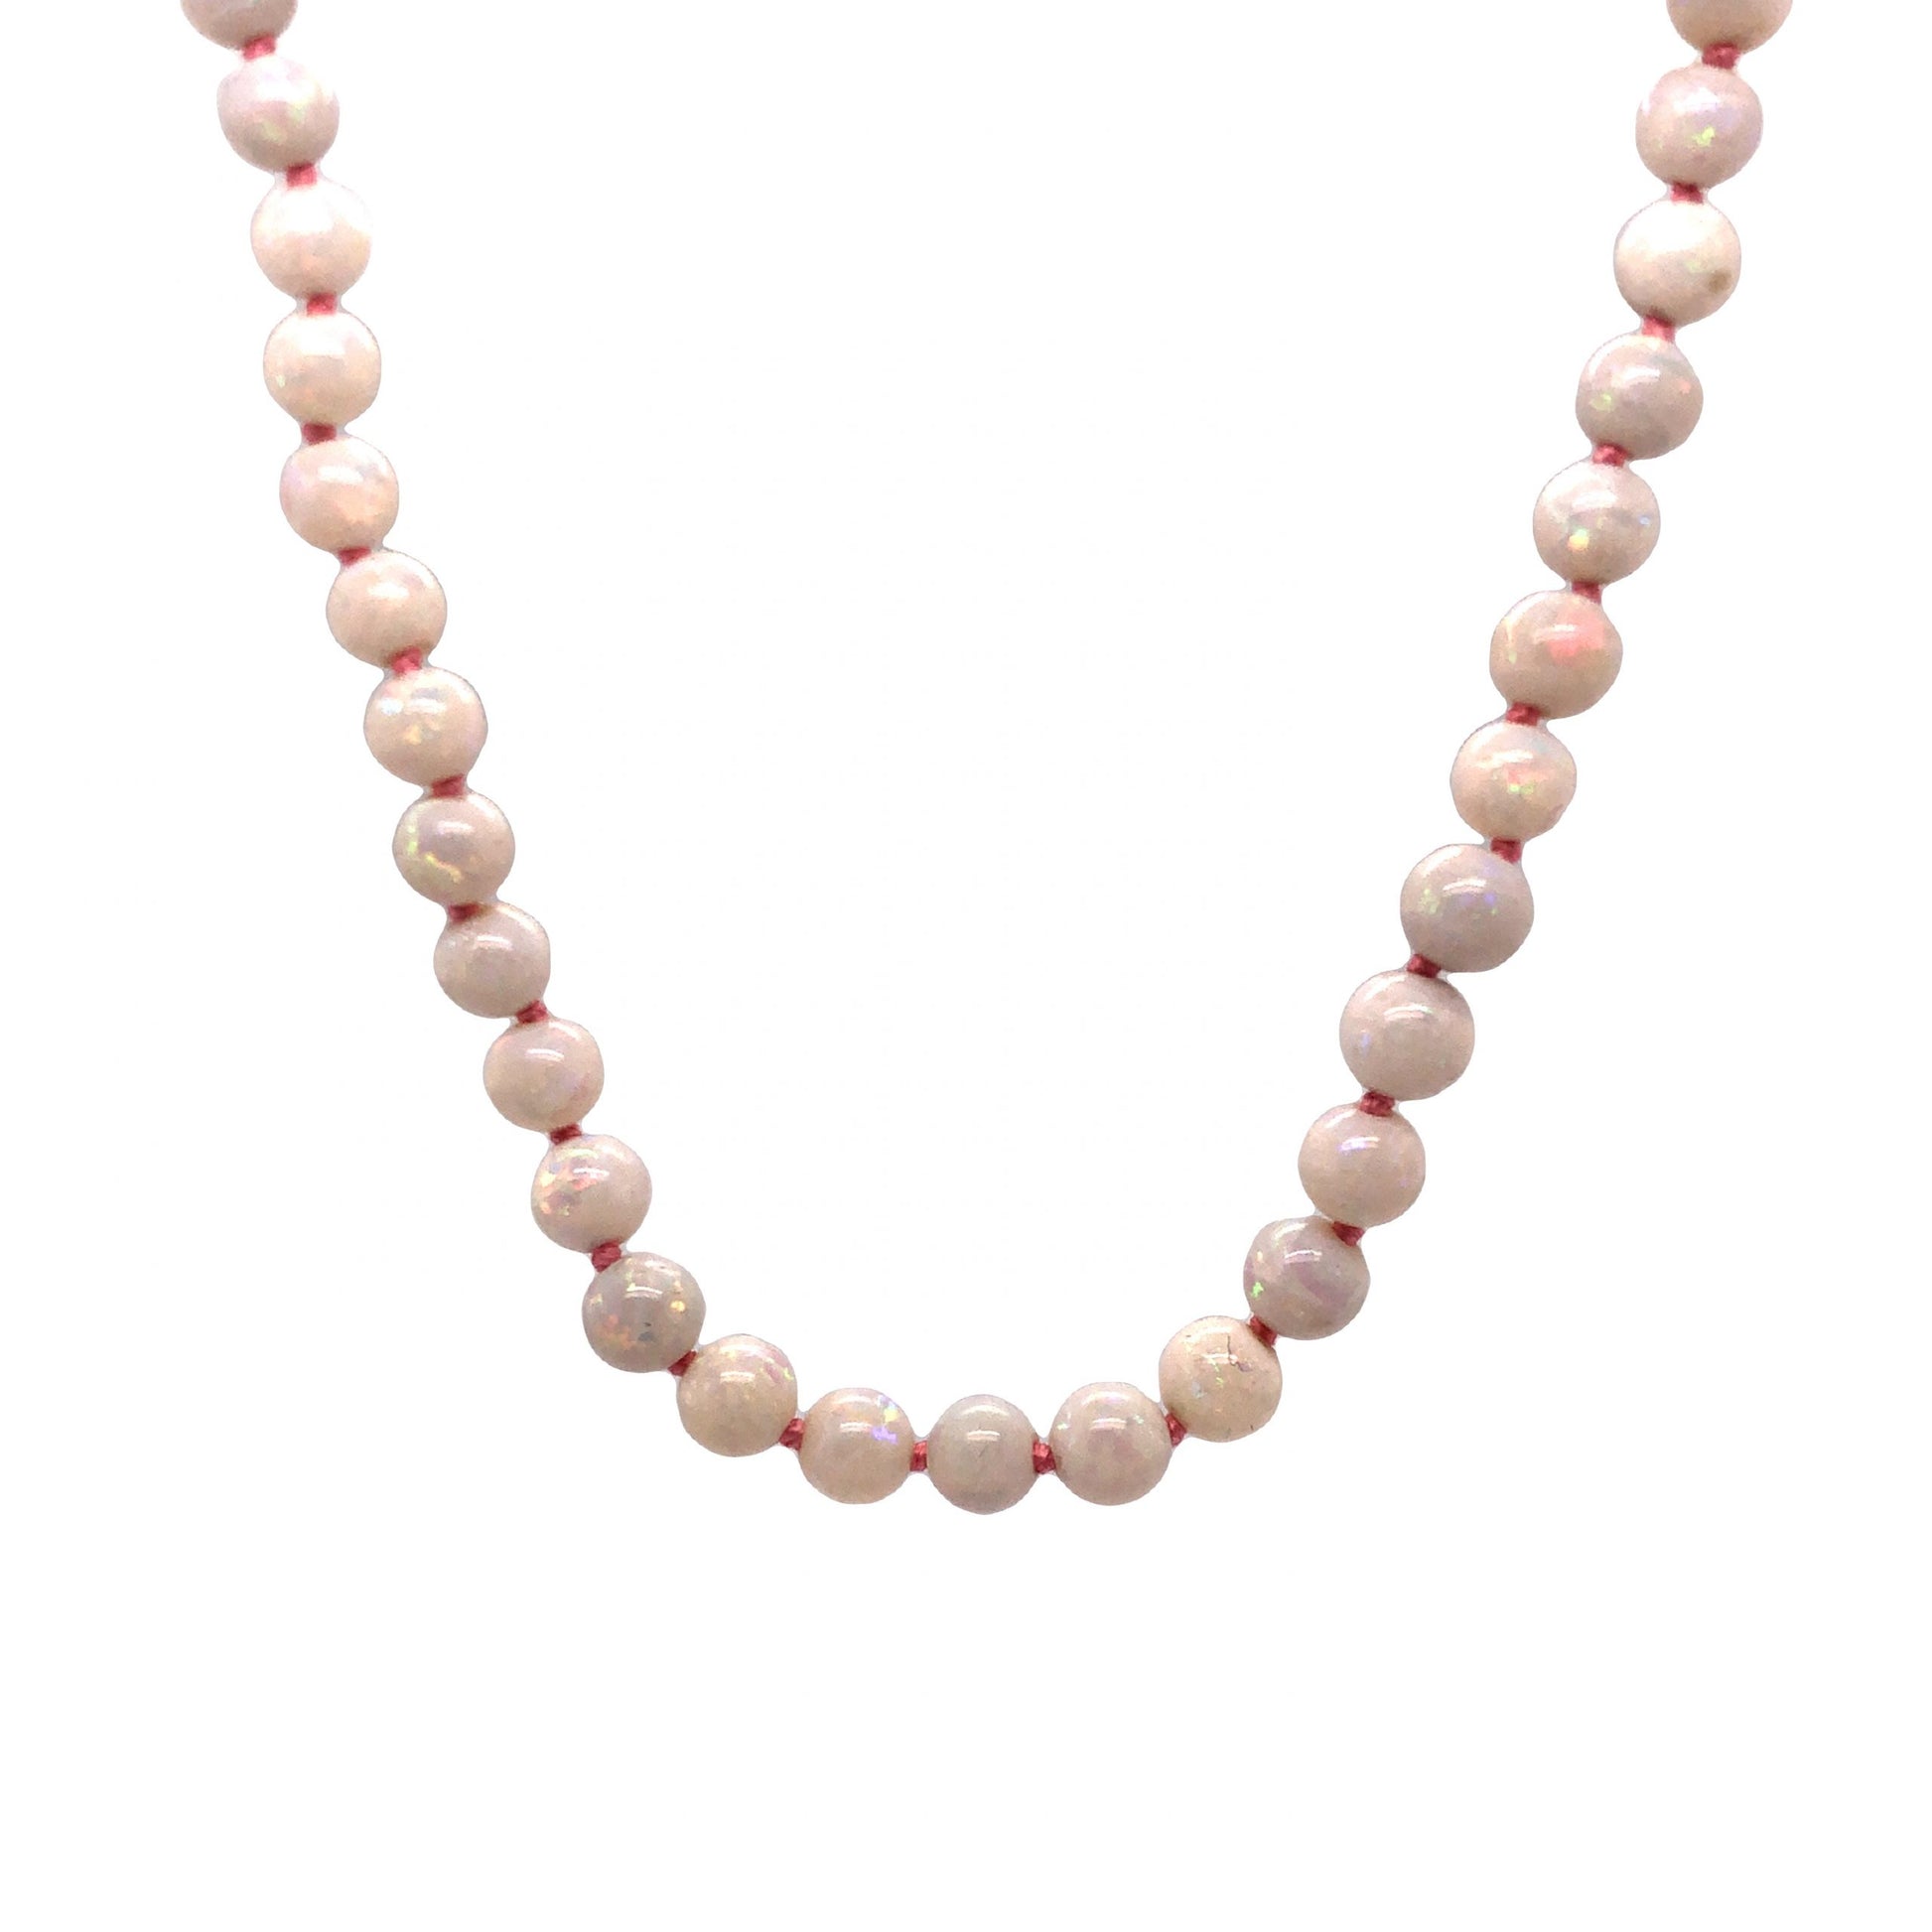 14 Inch Beaded Opal Necklace in 14k Yellow GoldComposition: PlatinumTotal Gram Weight: 14.9 gInscription: 585